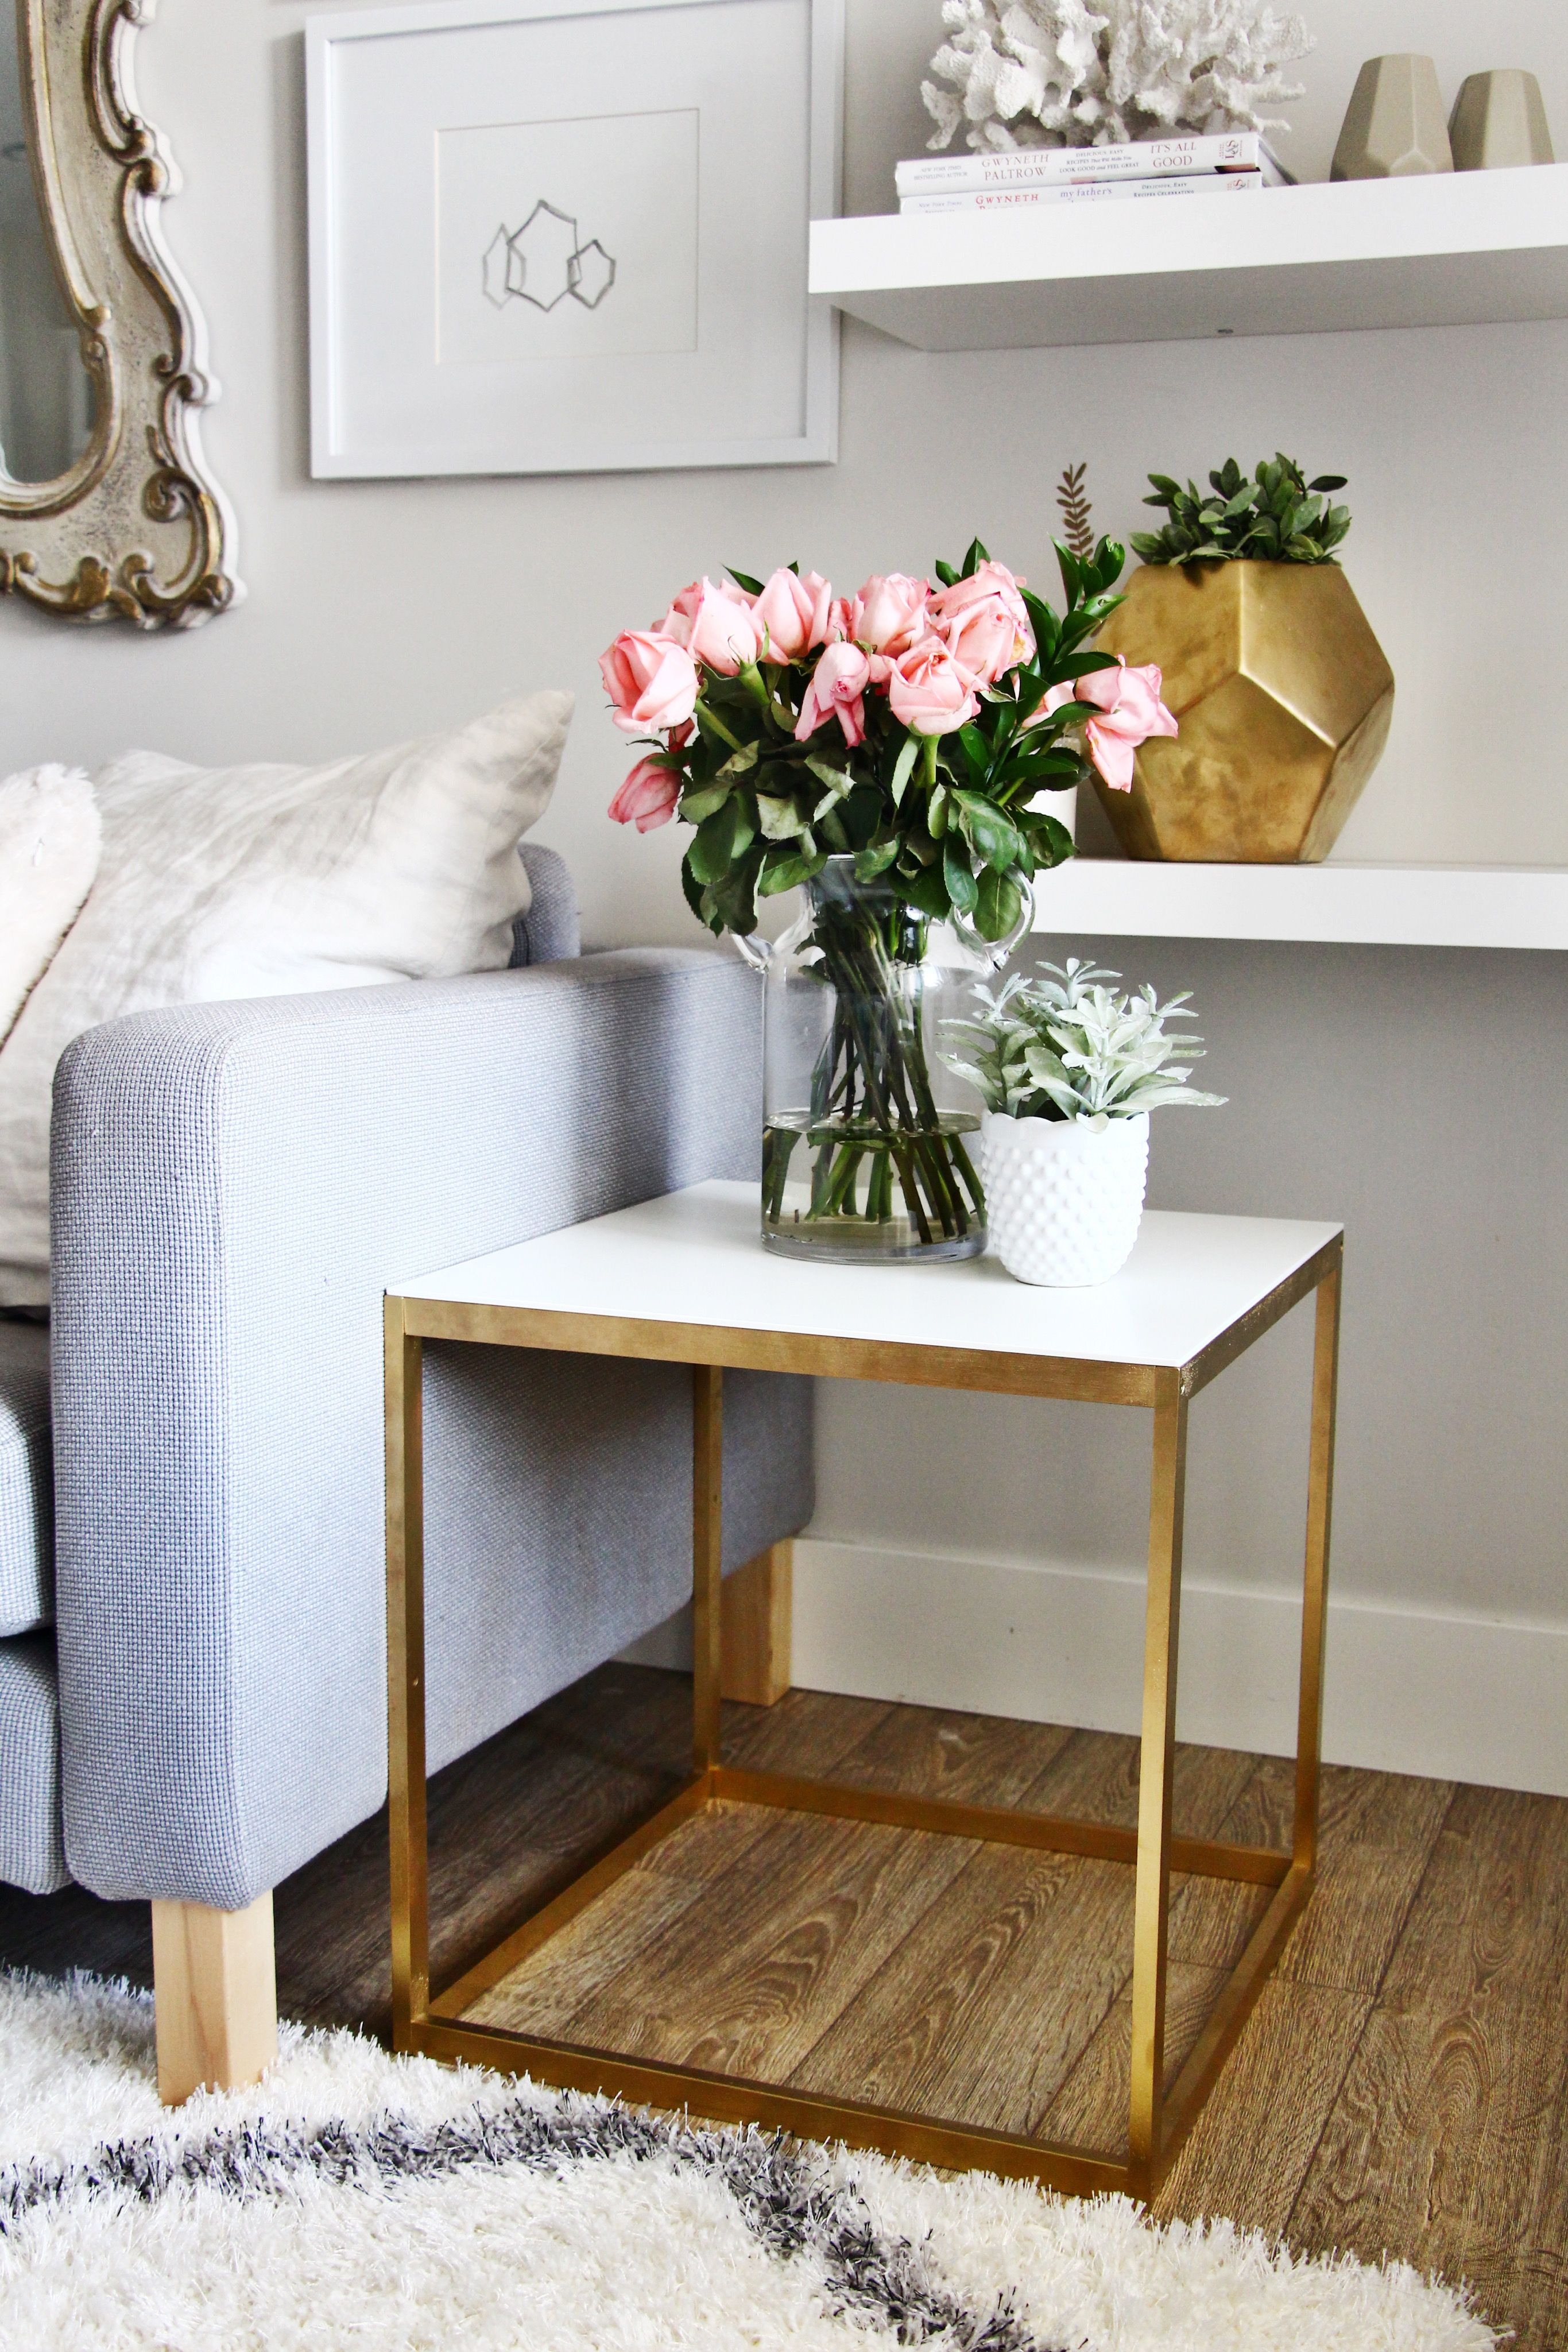 pin katie bain home where the heart decor small gold accent table ikea side hack interiordesign casegoodsideas moder interior design ideas clearance tables brass coffee runner